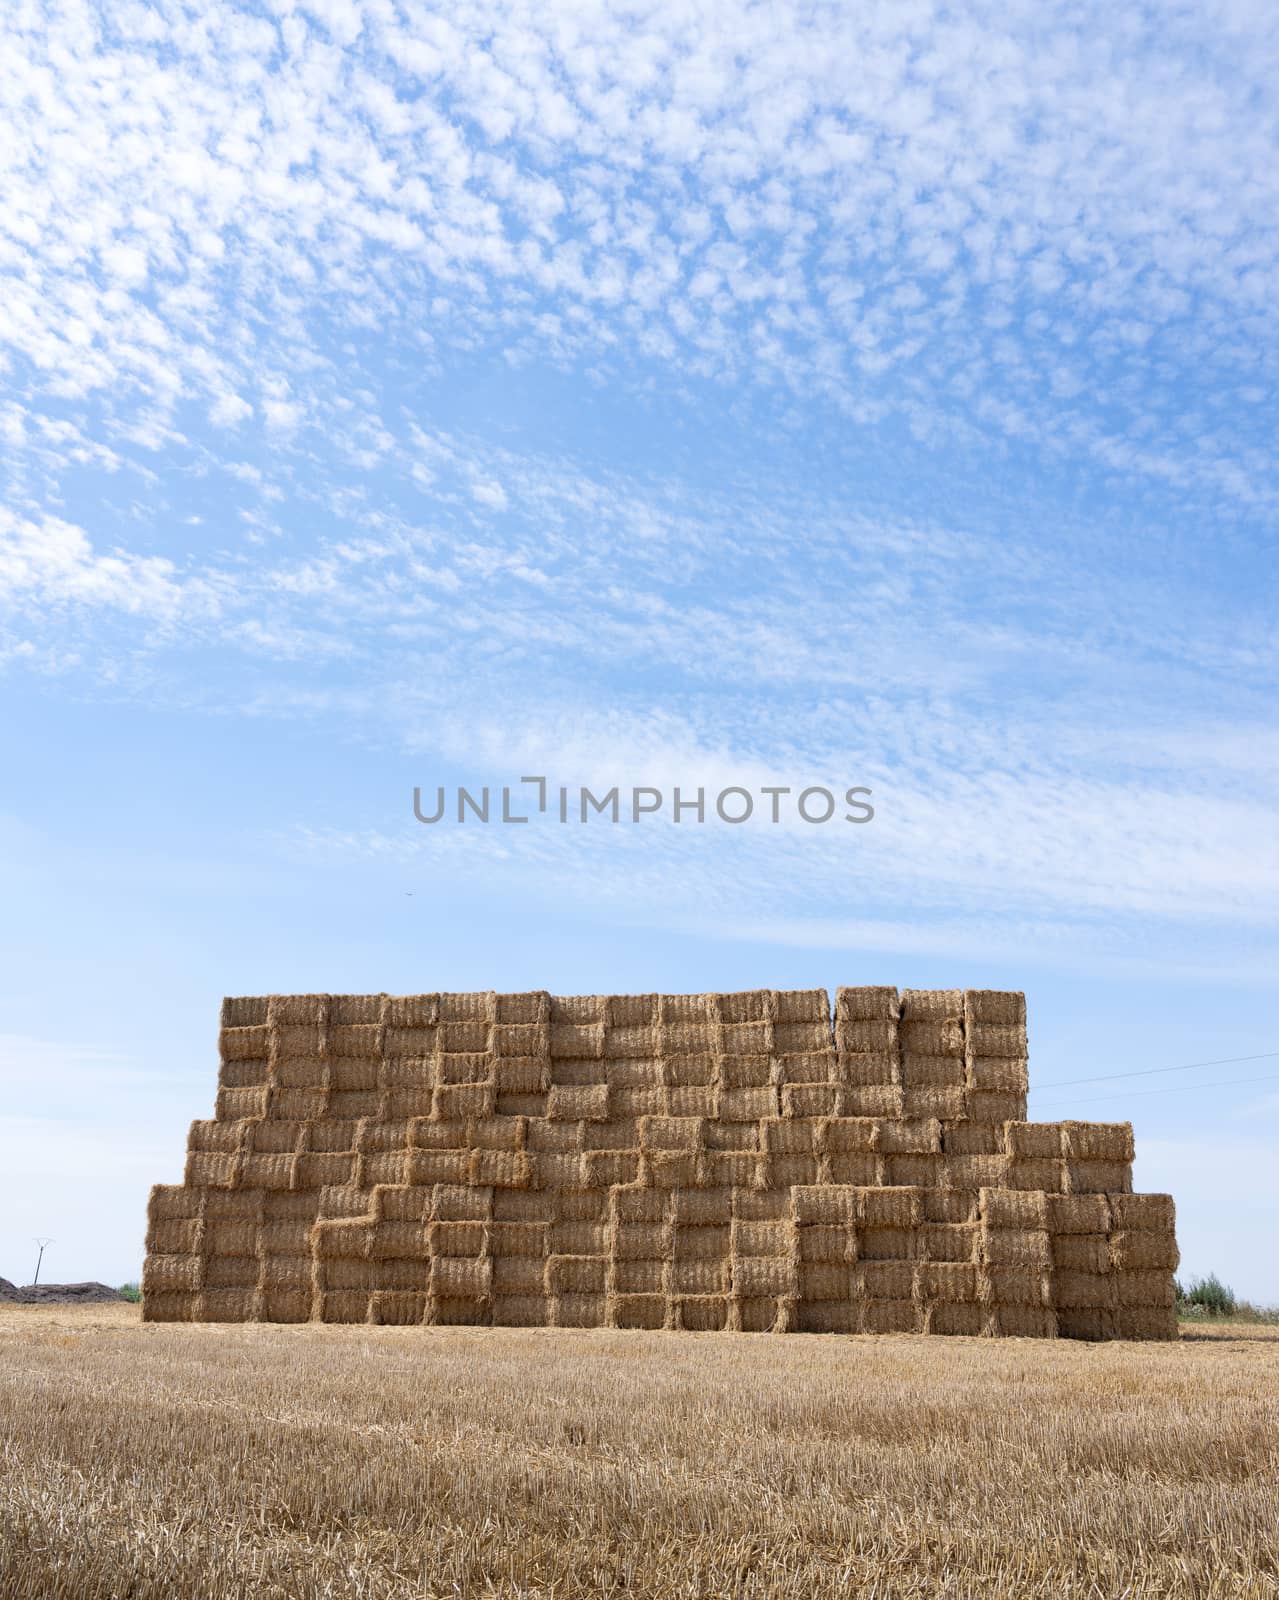 large piles of stacked straw bales in the noerth of france by ahavelaar